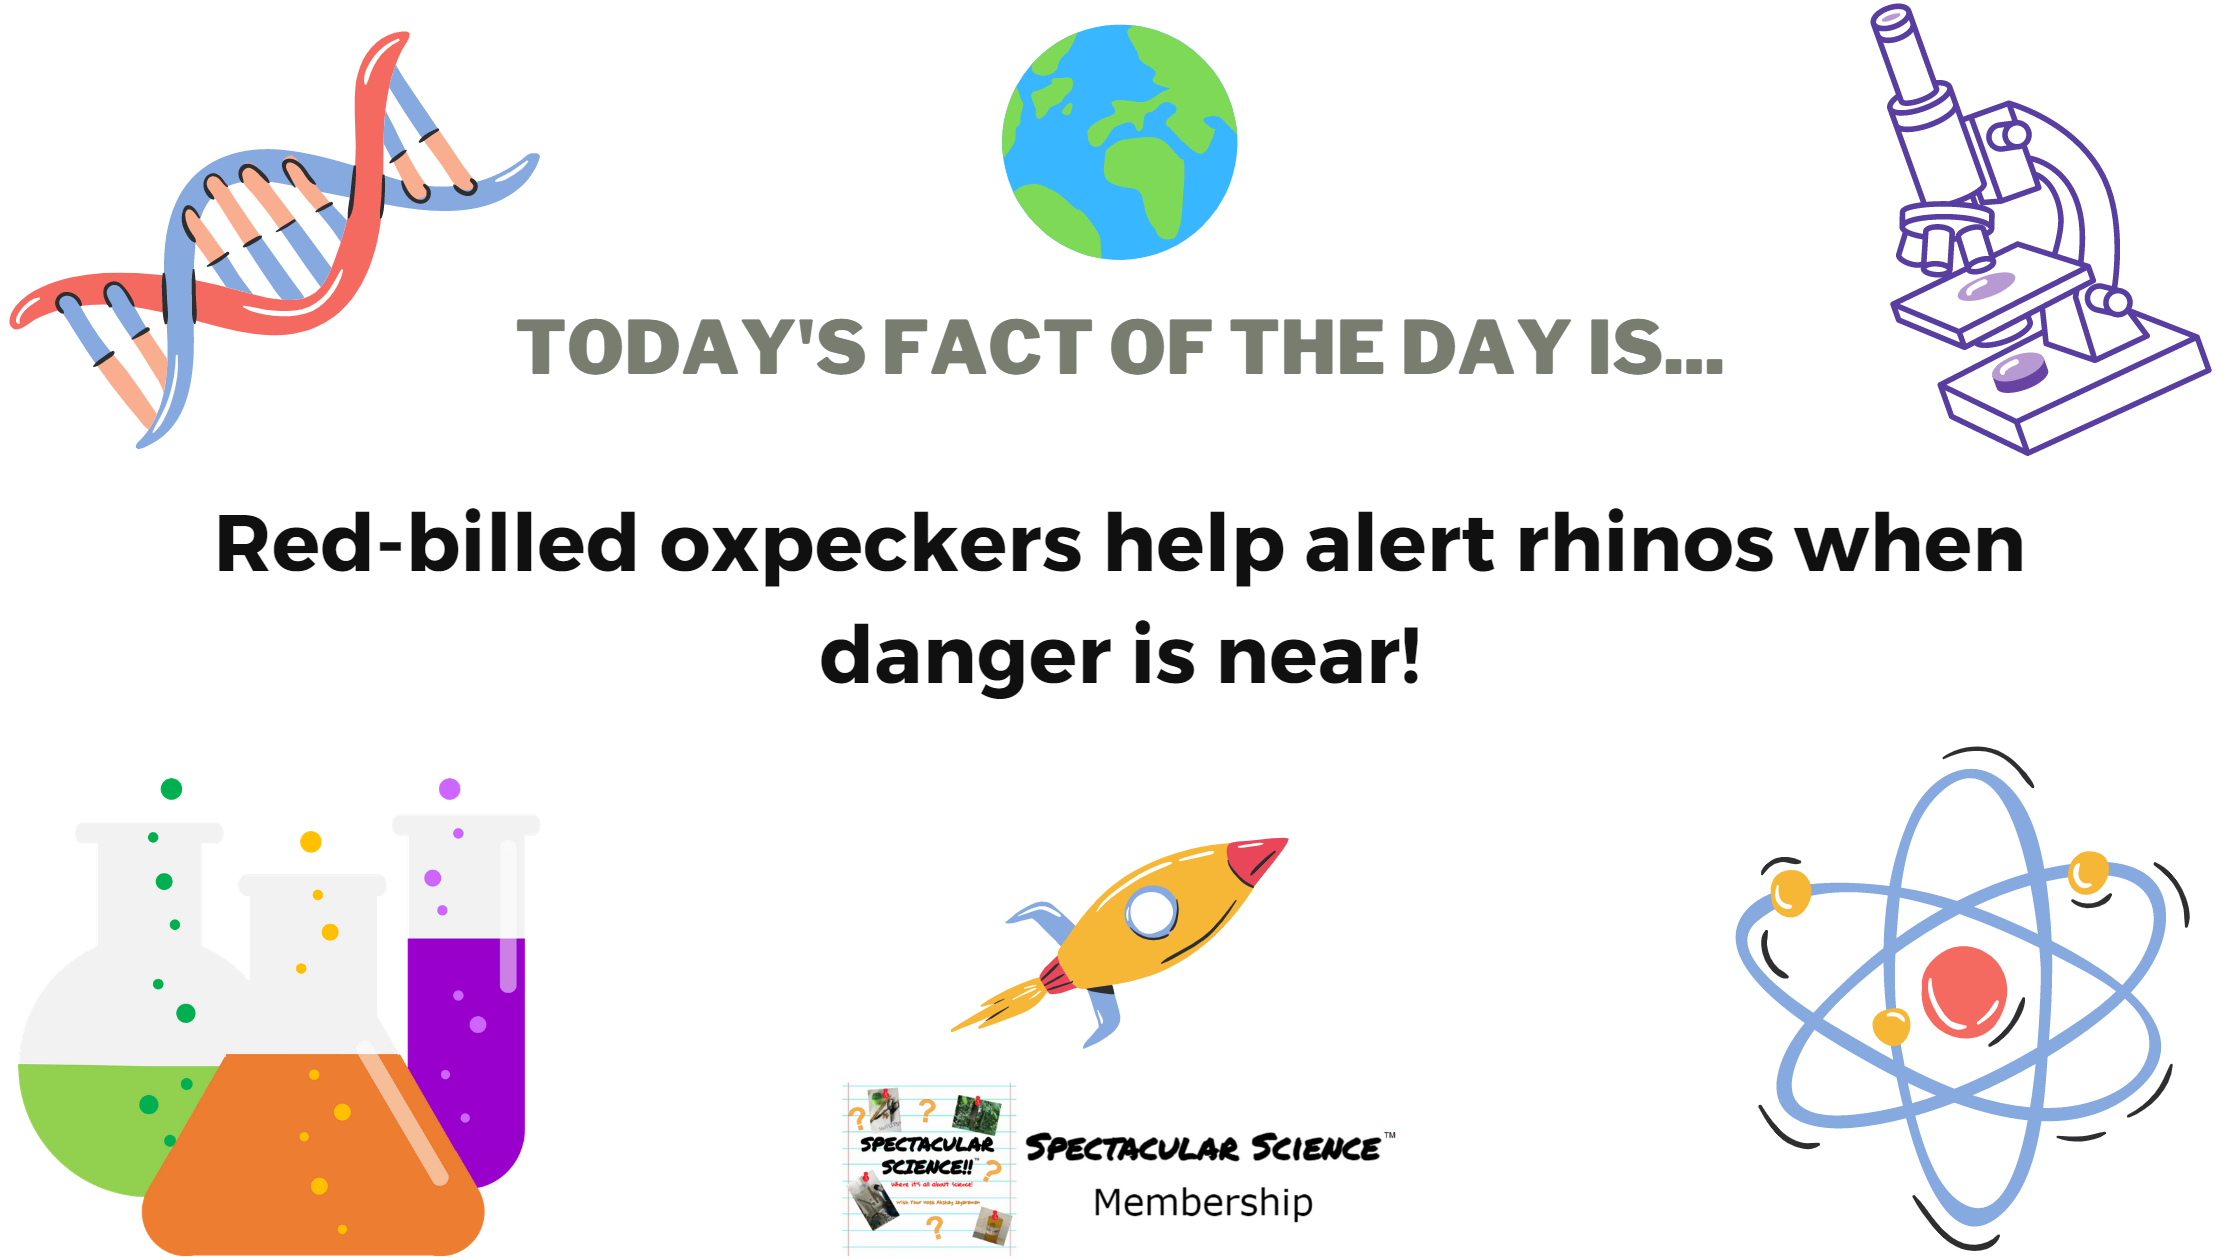 Fact of the Day Image January 25th